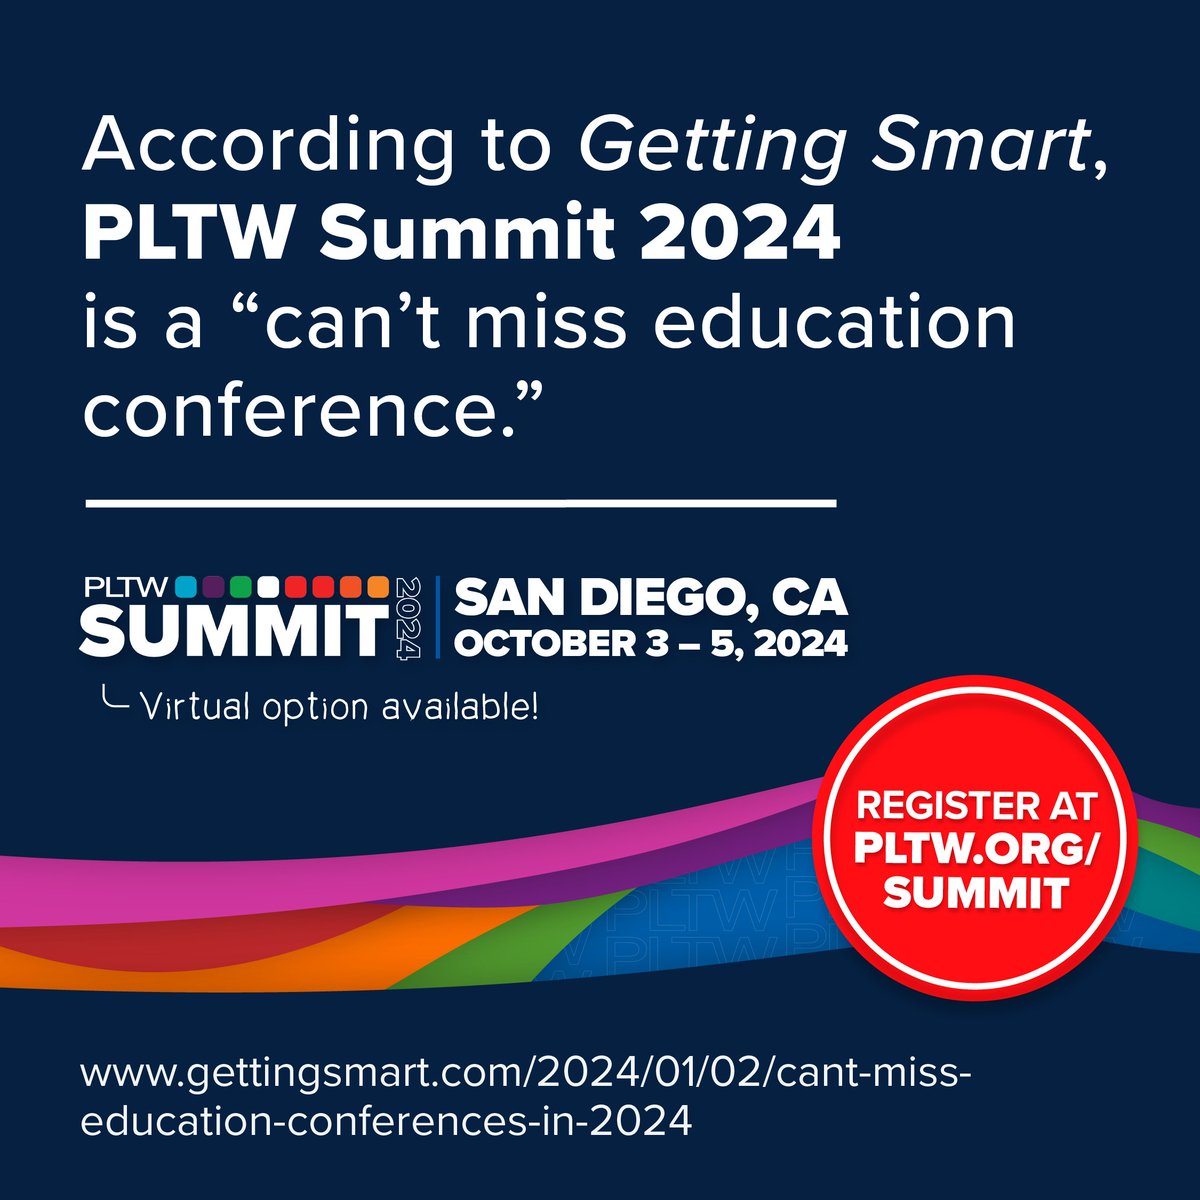 We’re honored that @Getting_Smart called #PLTWSummit 2024 one of the “can’t miss education conferences of 2024.” Join us this Oct. 3-5 in person in San Diego, CA or virtually from wherever you are to network, learn, and innovate with STEM educators and advocates.